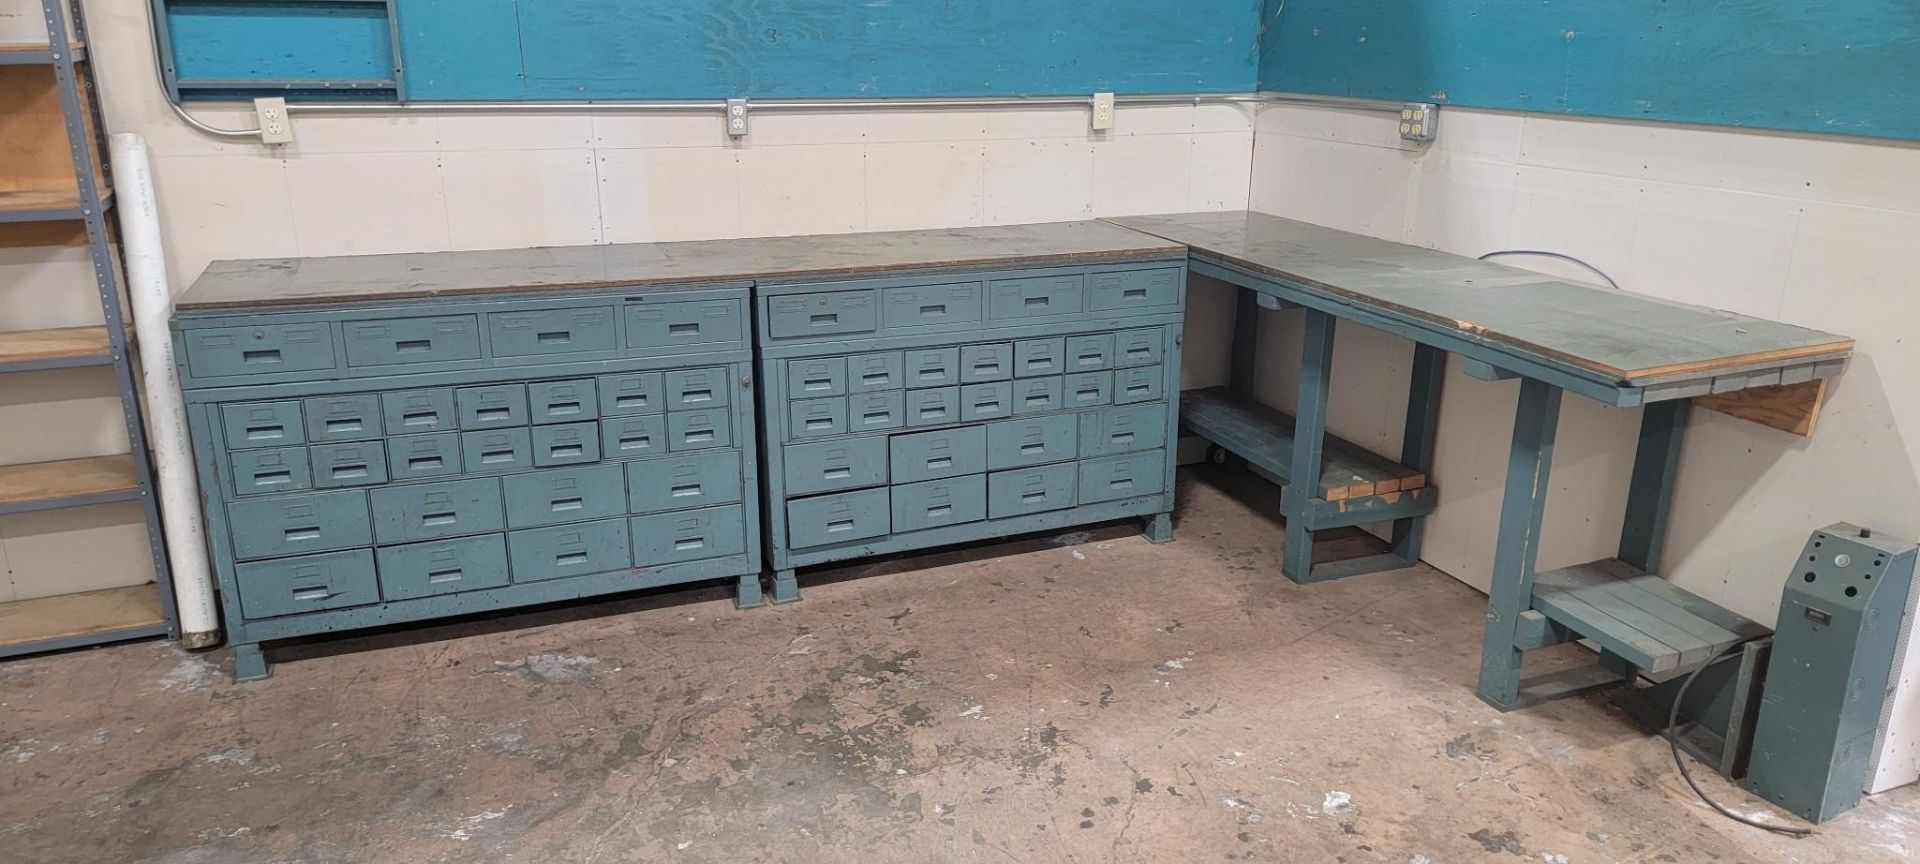 STEEL WORKBENCHES WITH DRAWERS